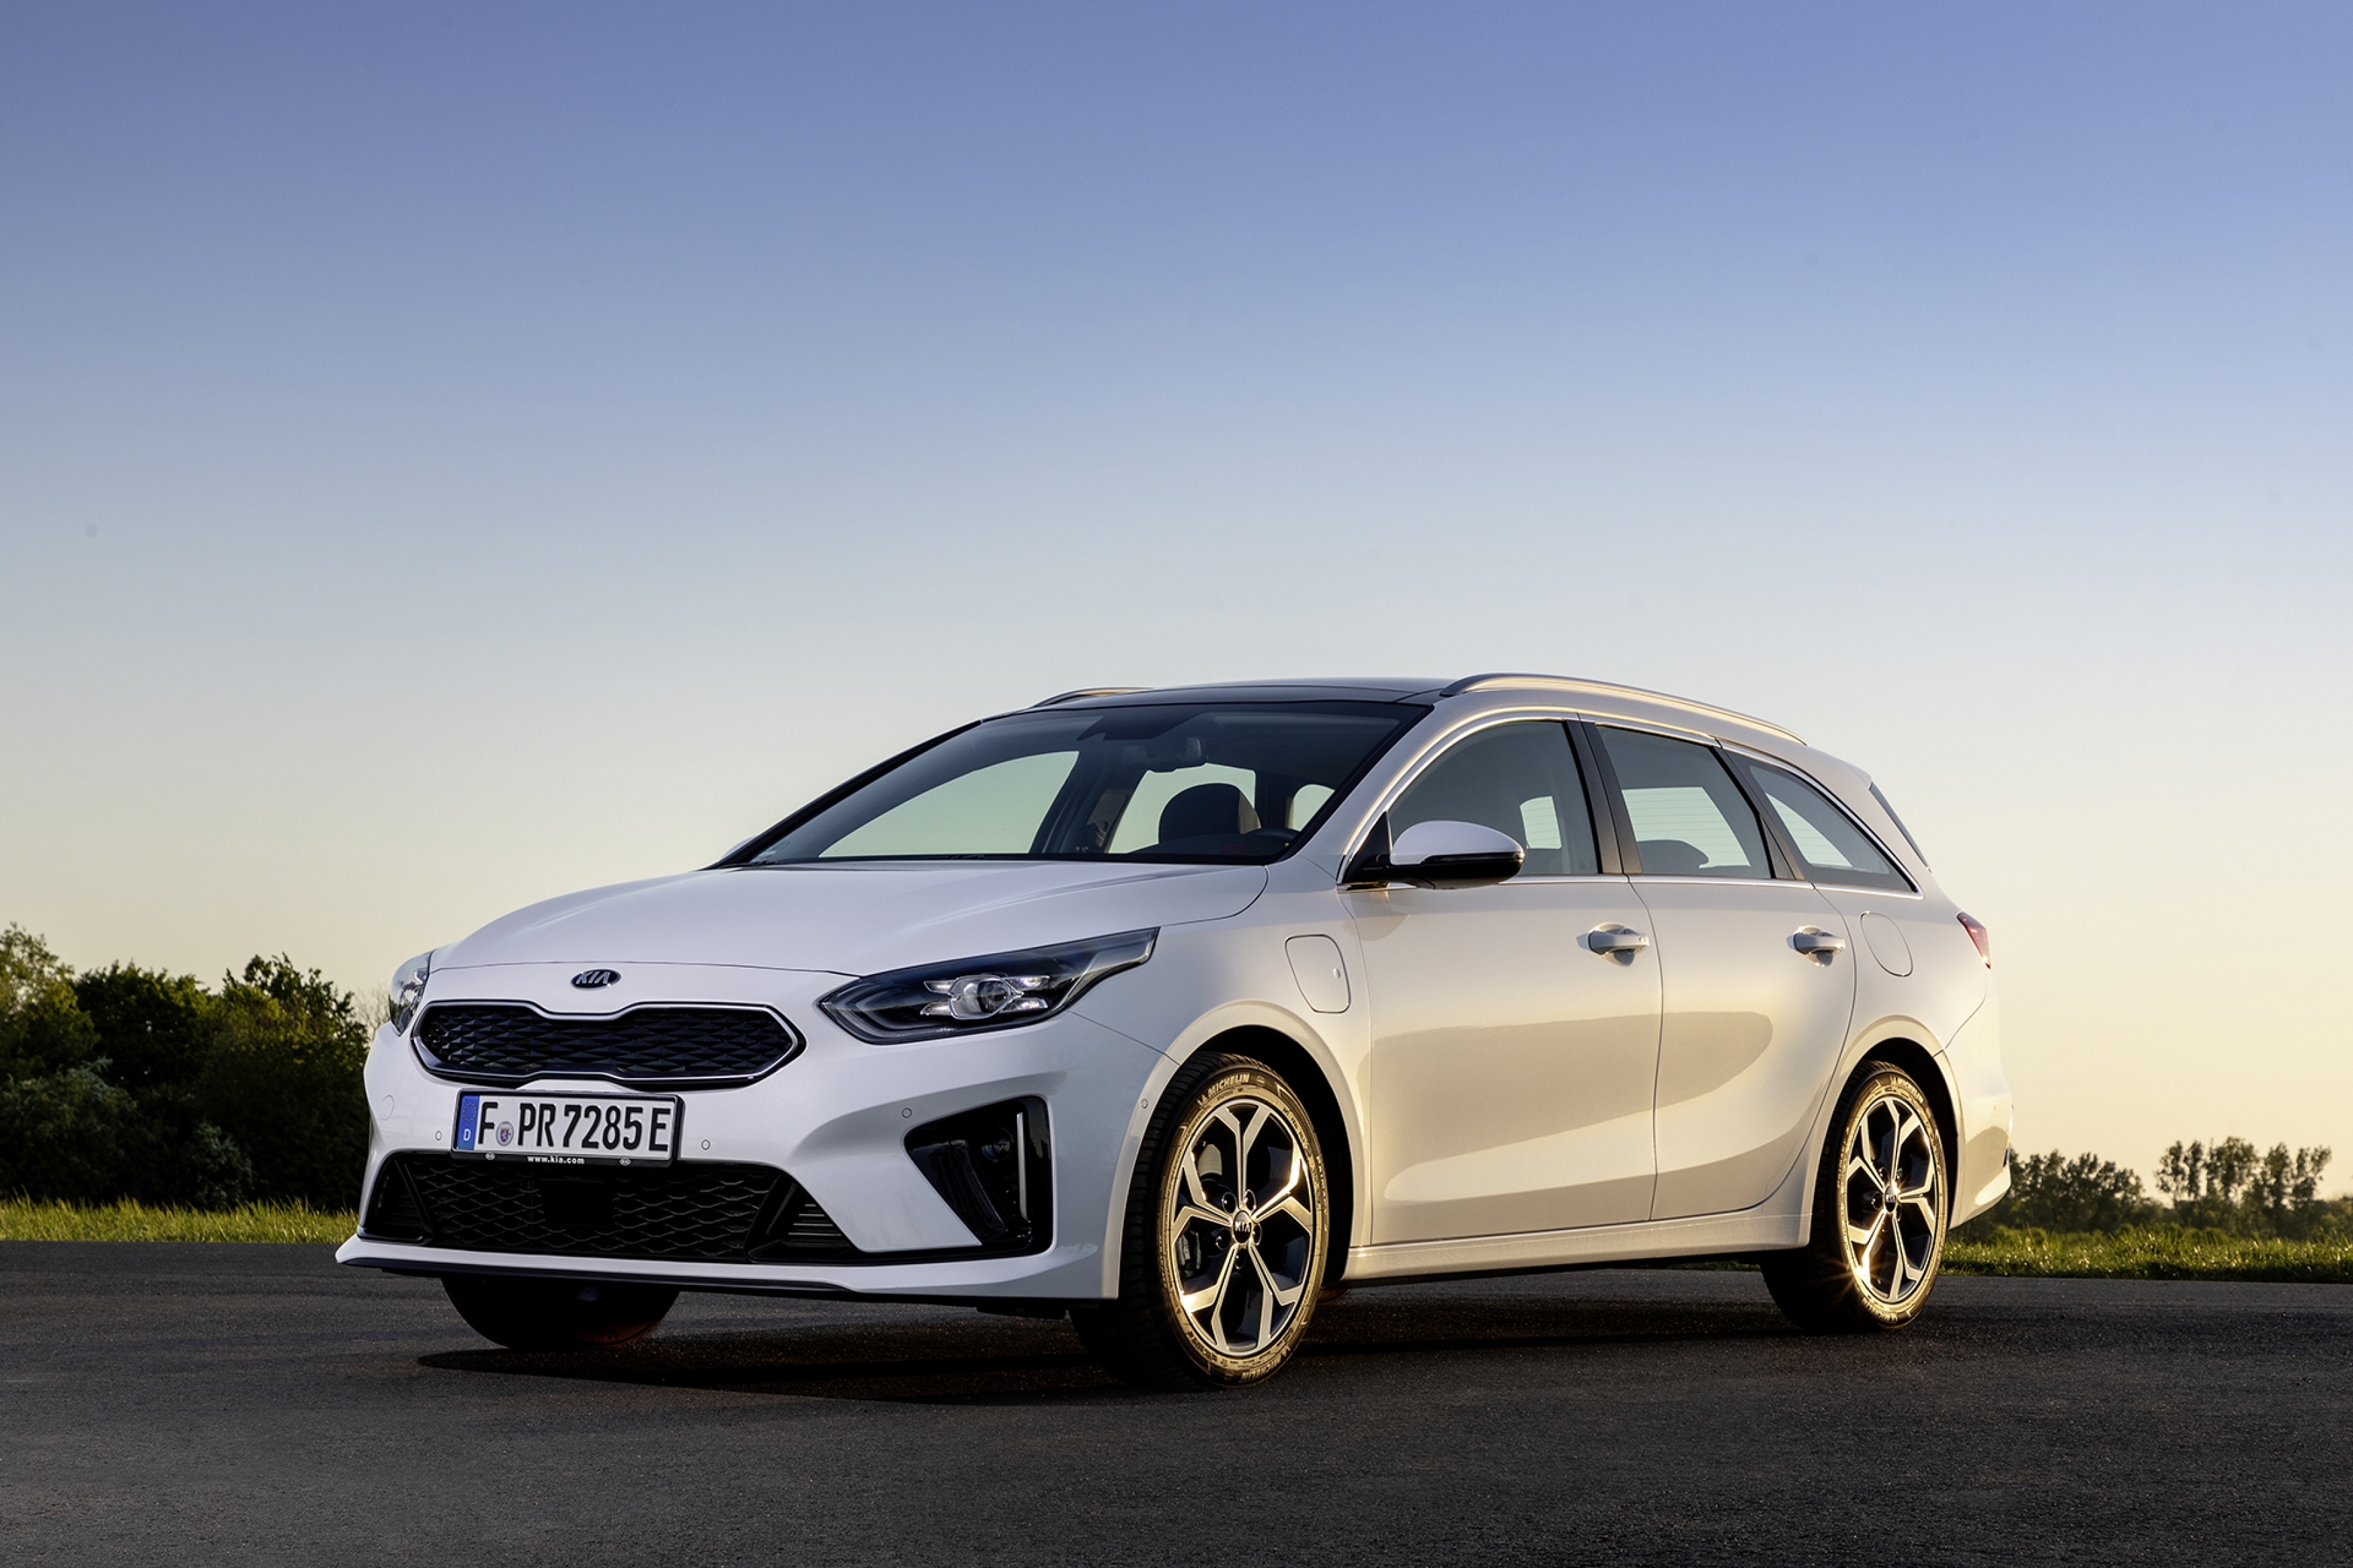 First Drive The Kia Ceed SW PHEV brings a great mix of efficiency and